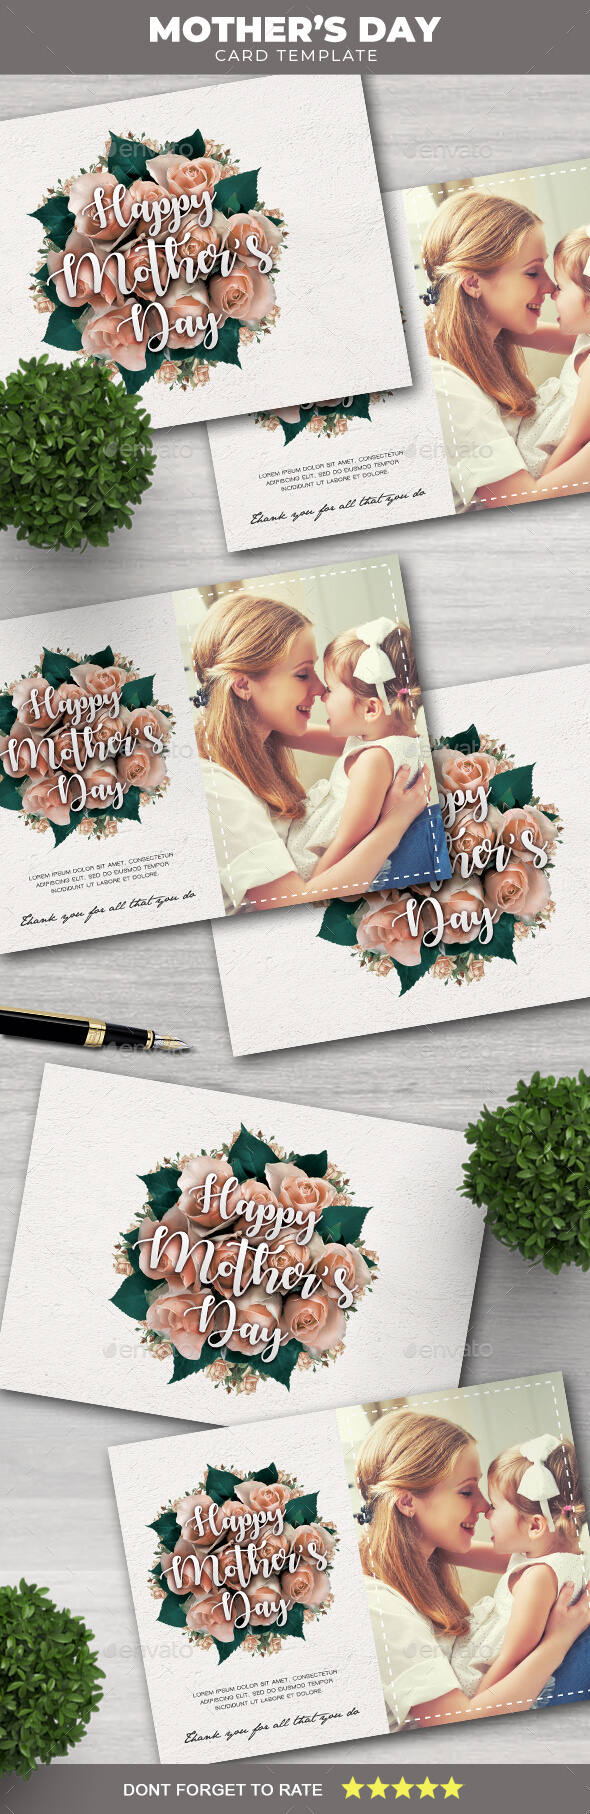 2020's Best Selling Greeting Card Designs & Templates Throughout Death Anniversary Cards Templates